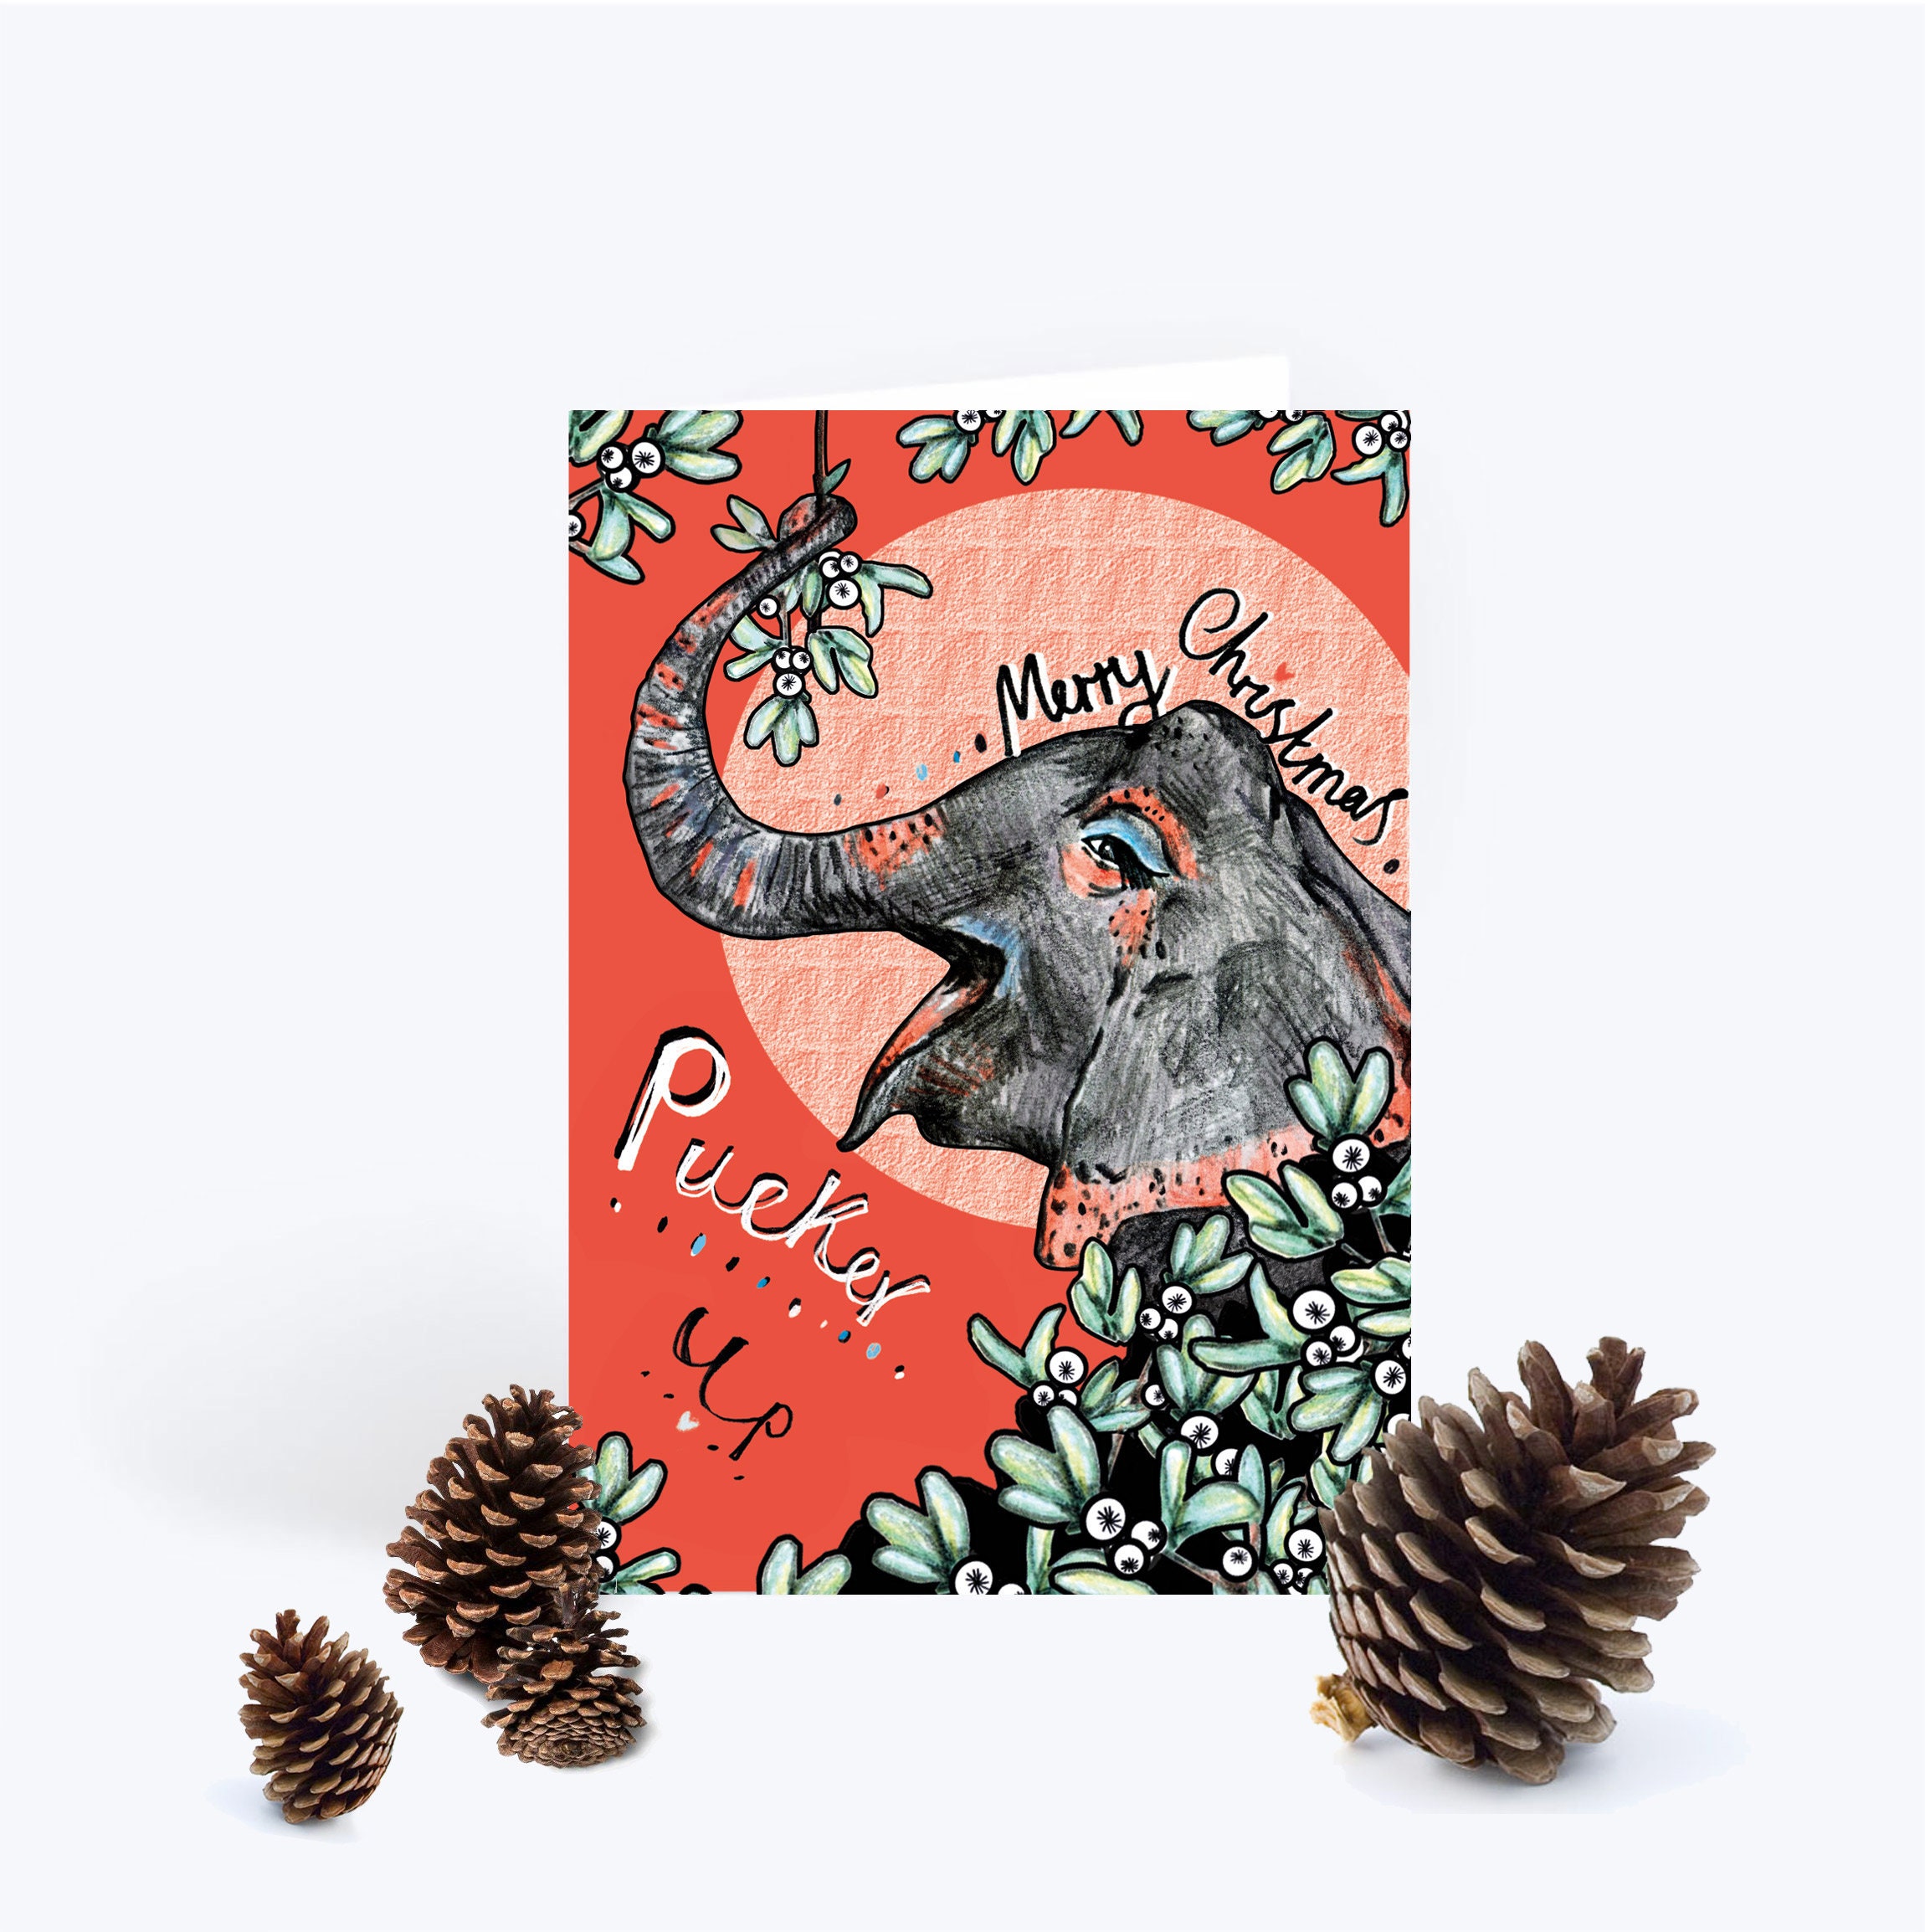 Quirky Illustrative Christmas Cards Pack Of Five A6 Cards Etsy